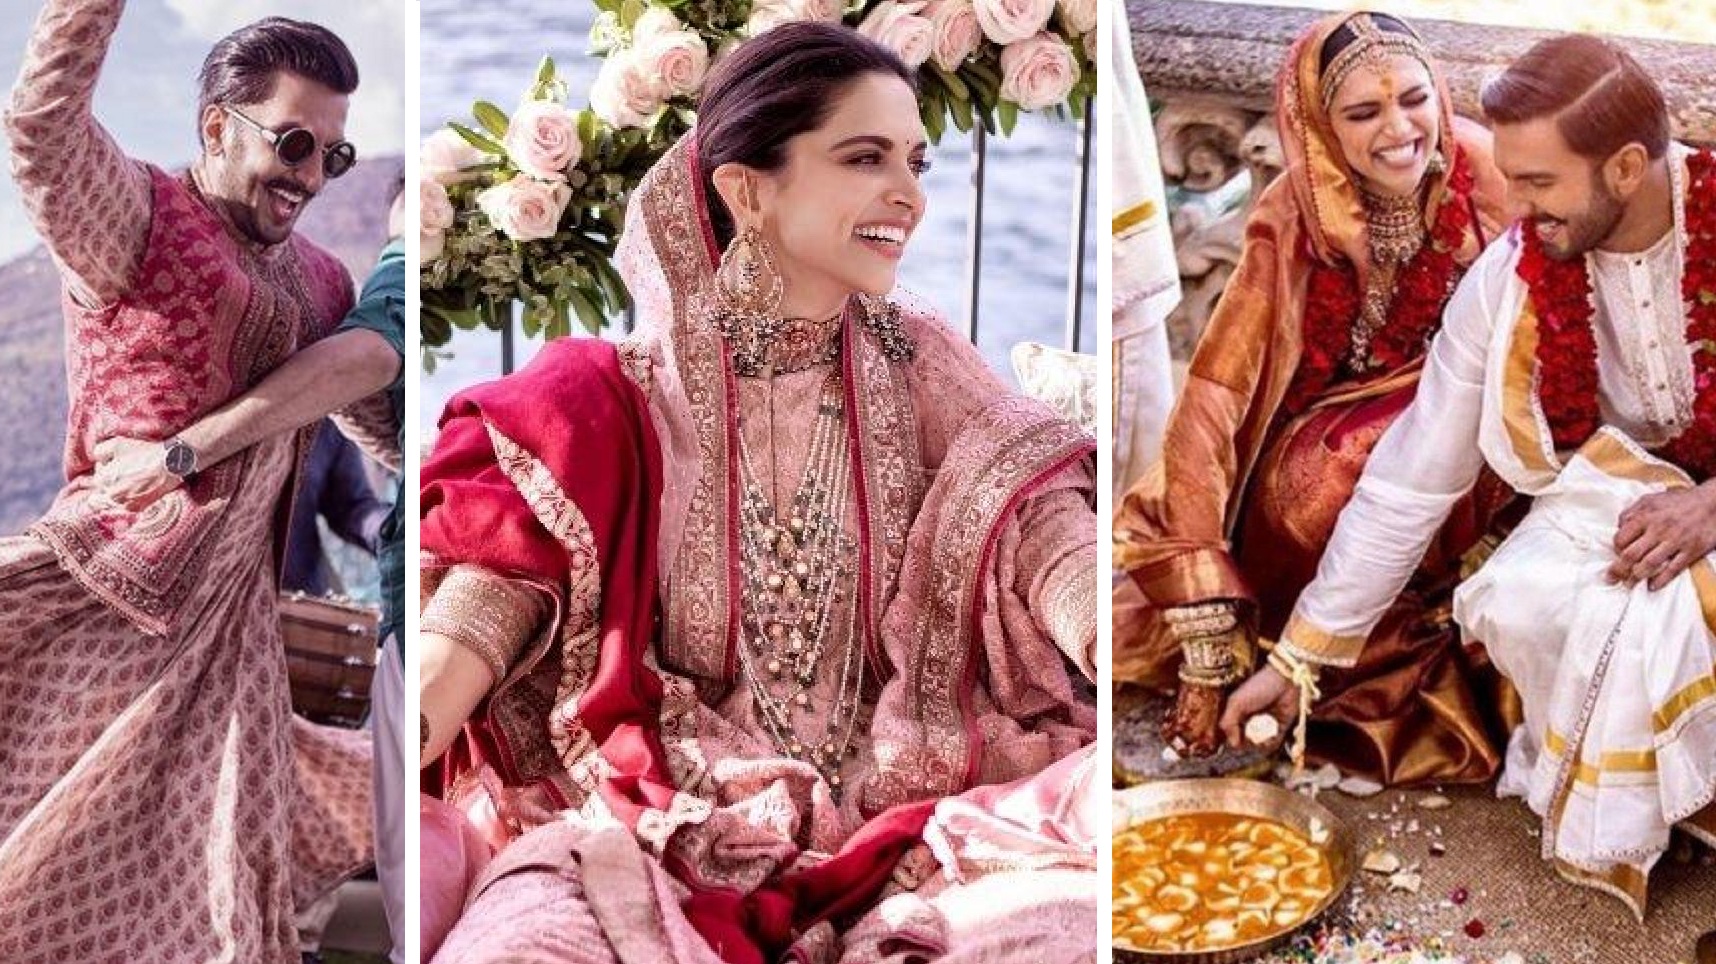 These New Pictures From DeepVeer Wedding Will Make You Believe In Fairytales!